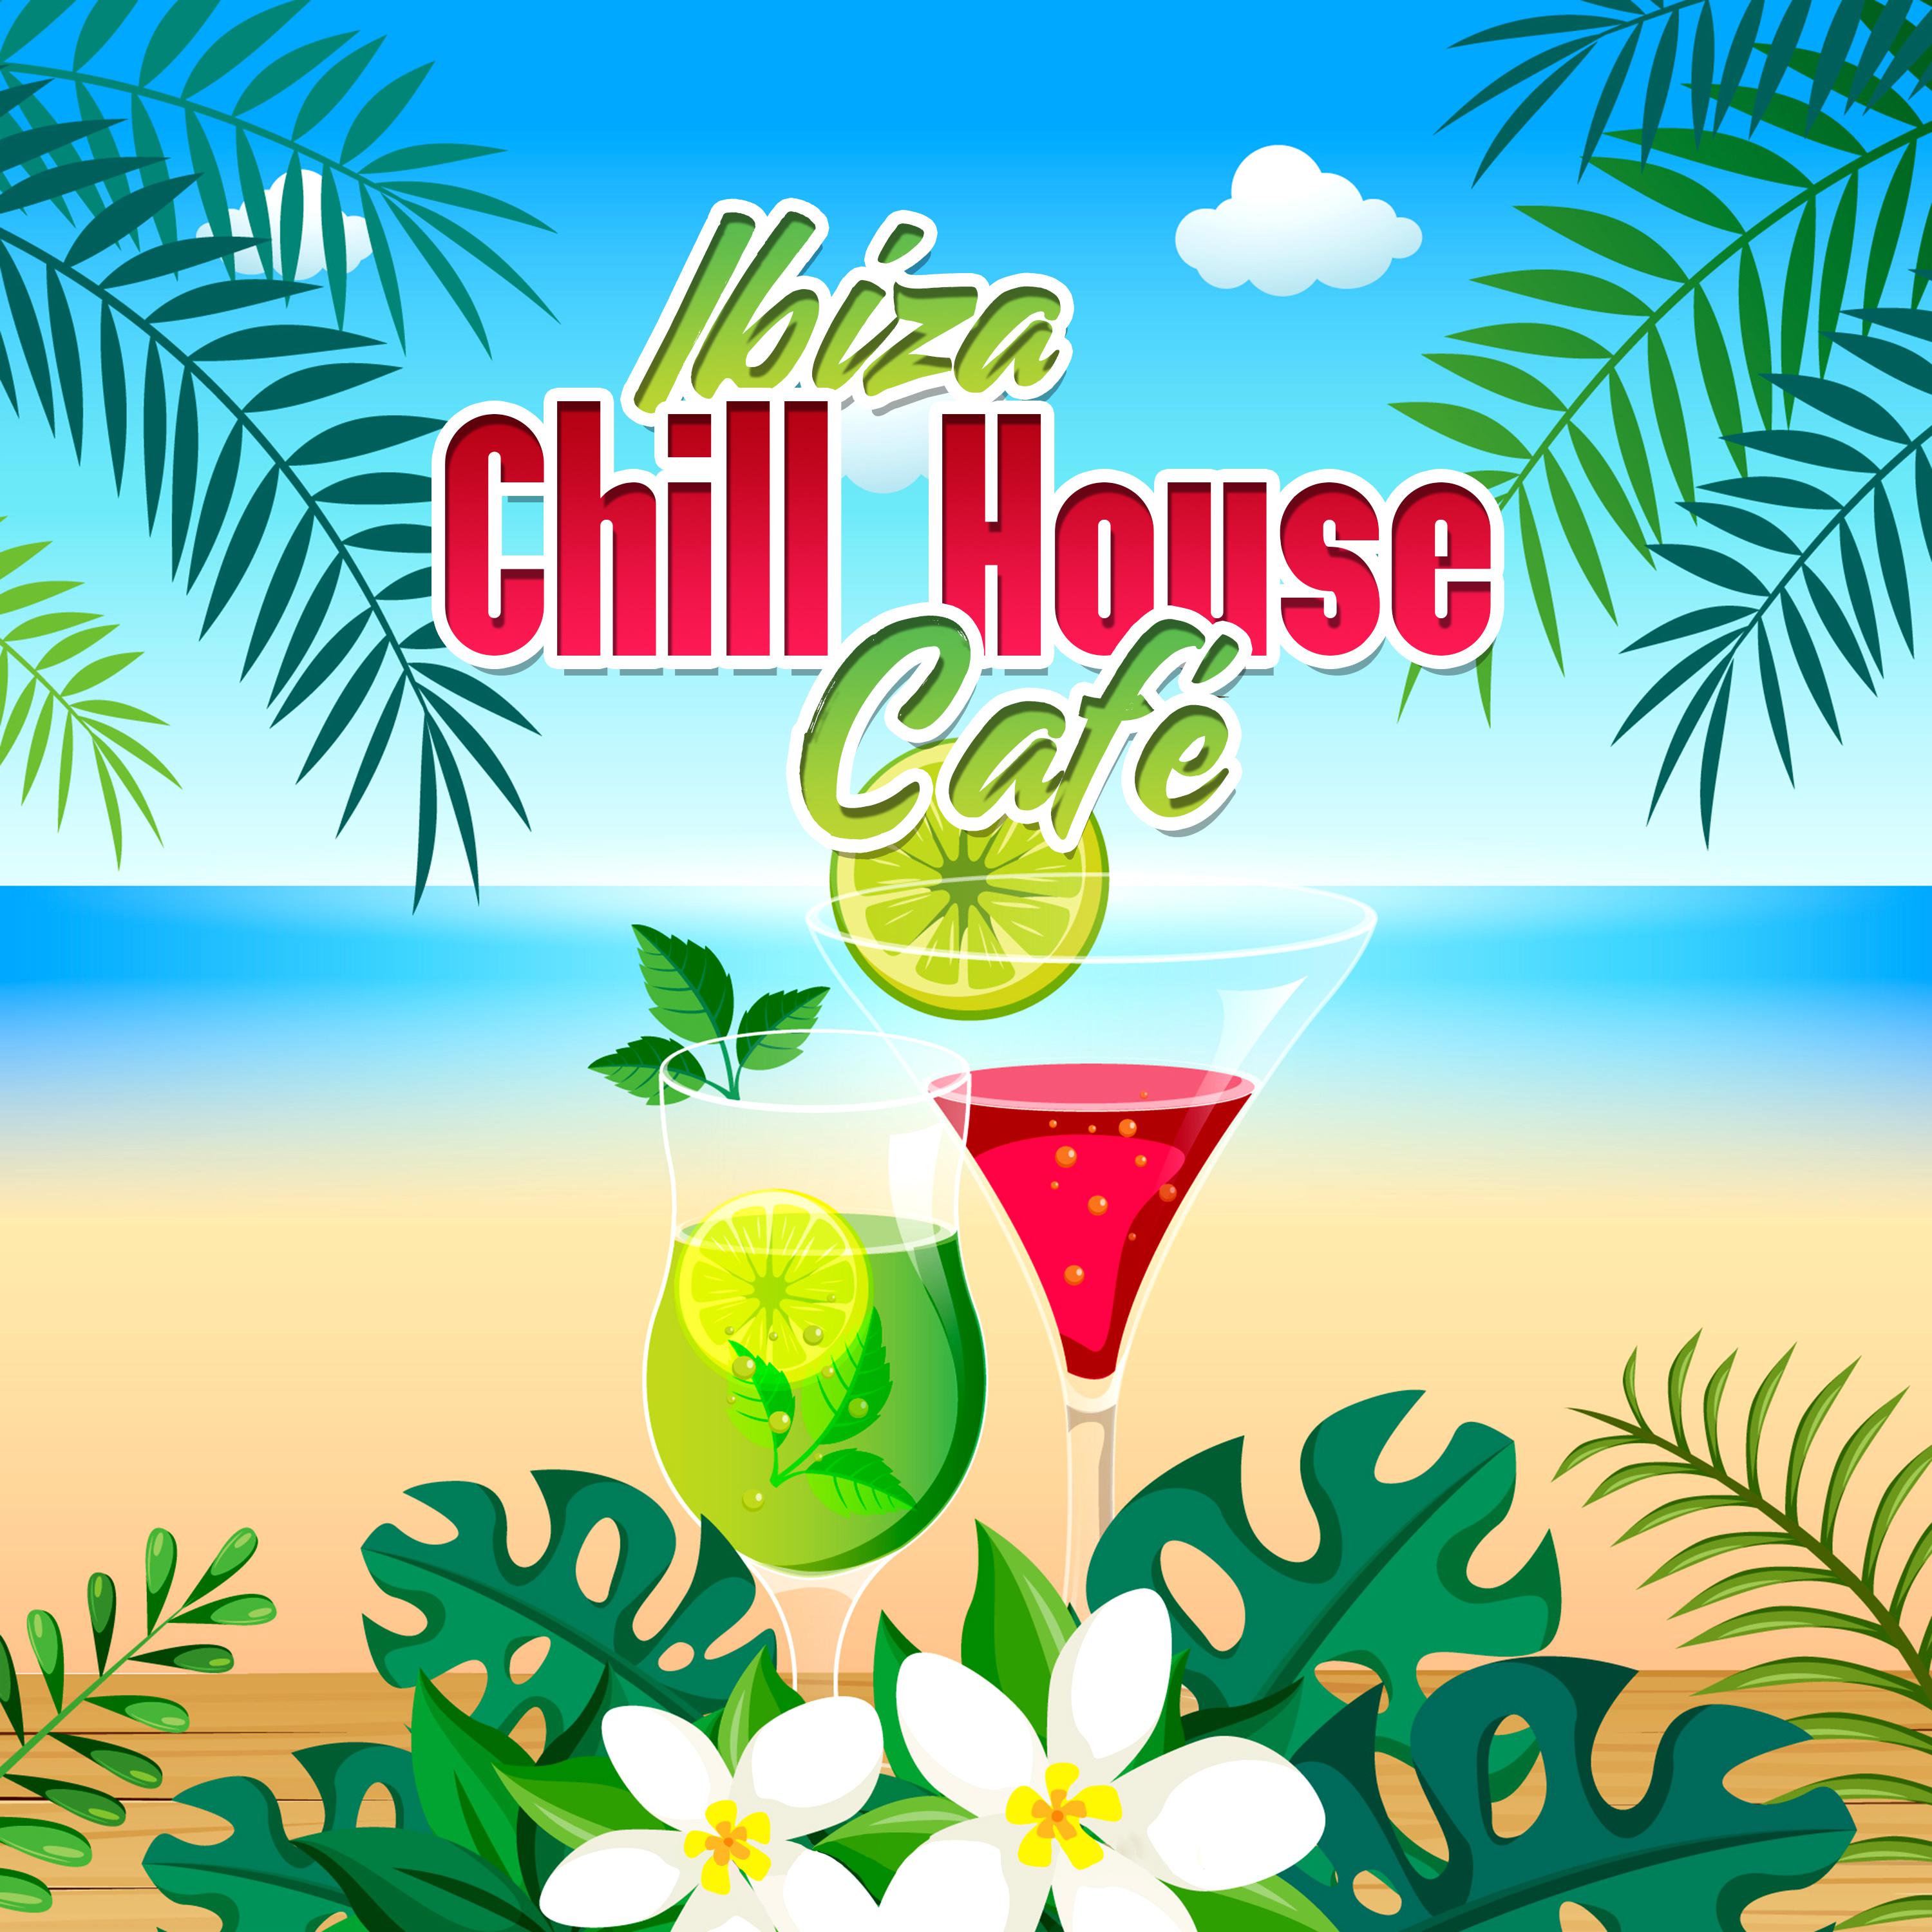 Ibiza Chill House Cafe Hot Party Night, After Sunset Background del Mar